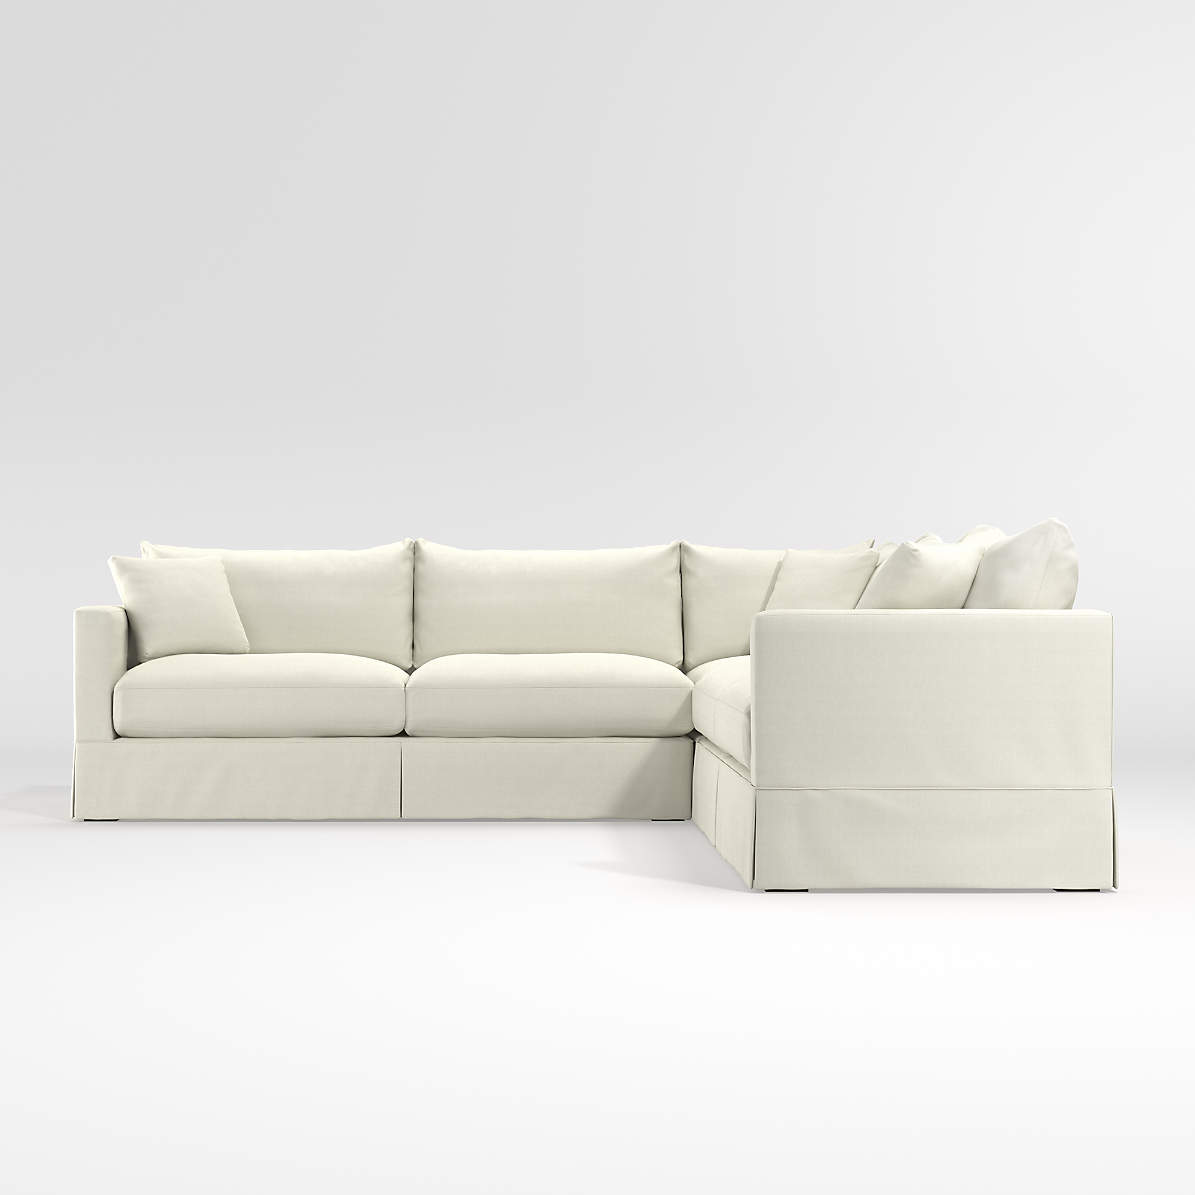 Willow 3 Piece Modern Slipcovered Sectional Reviews Crate And Barrel